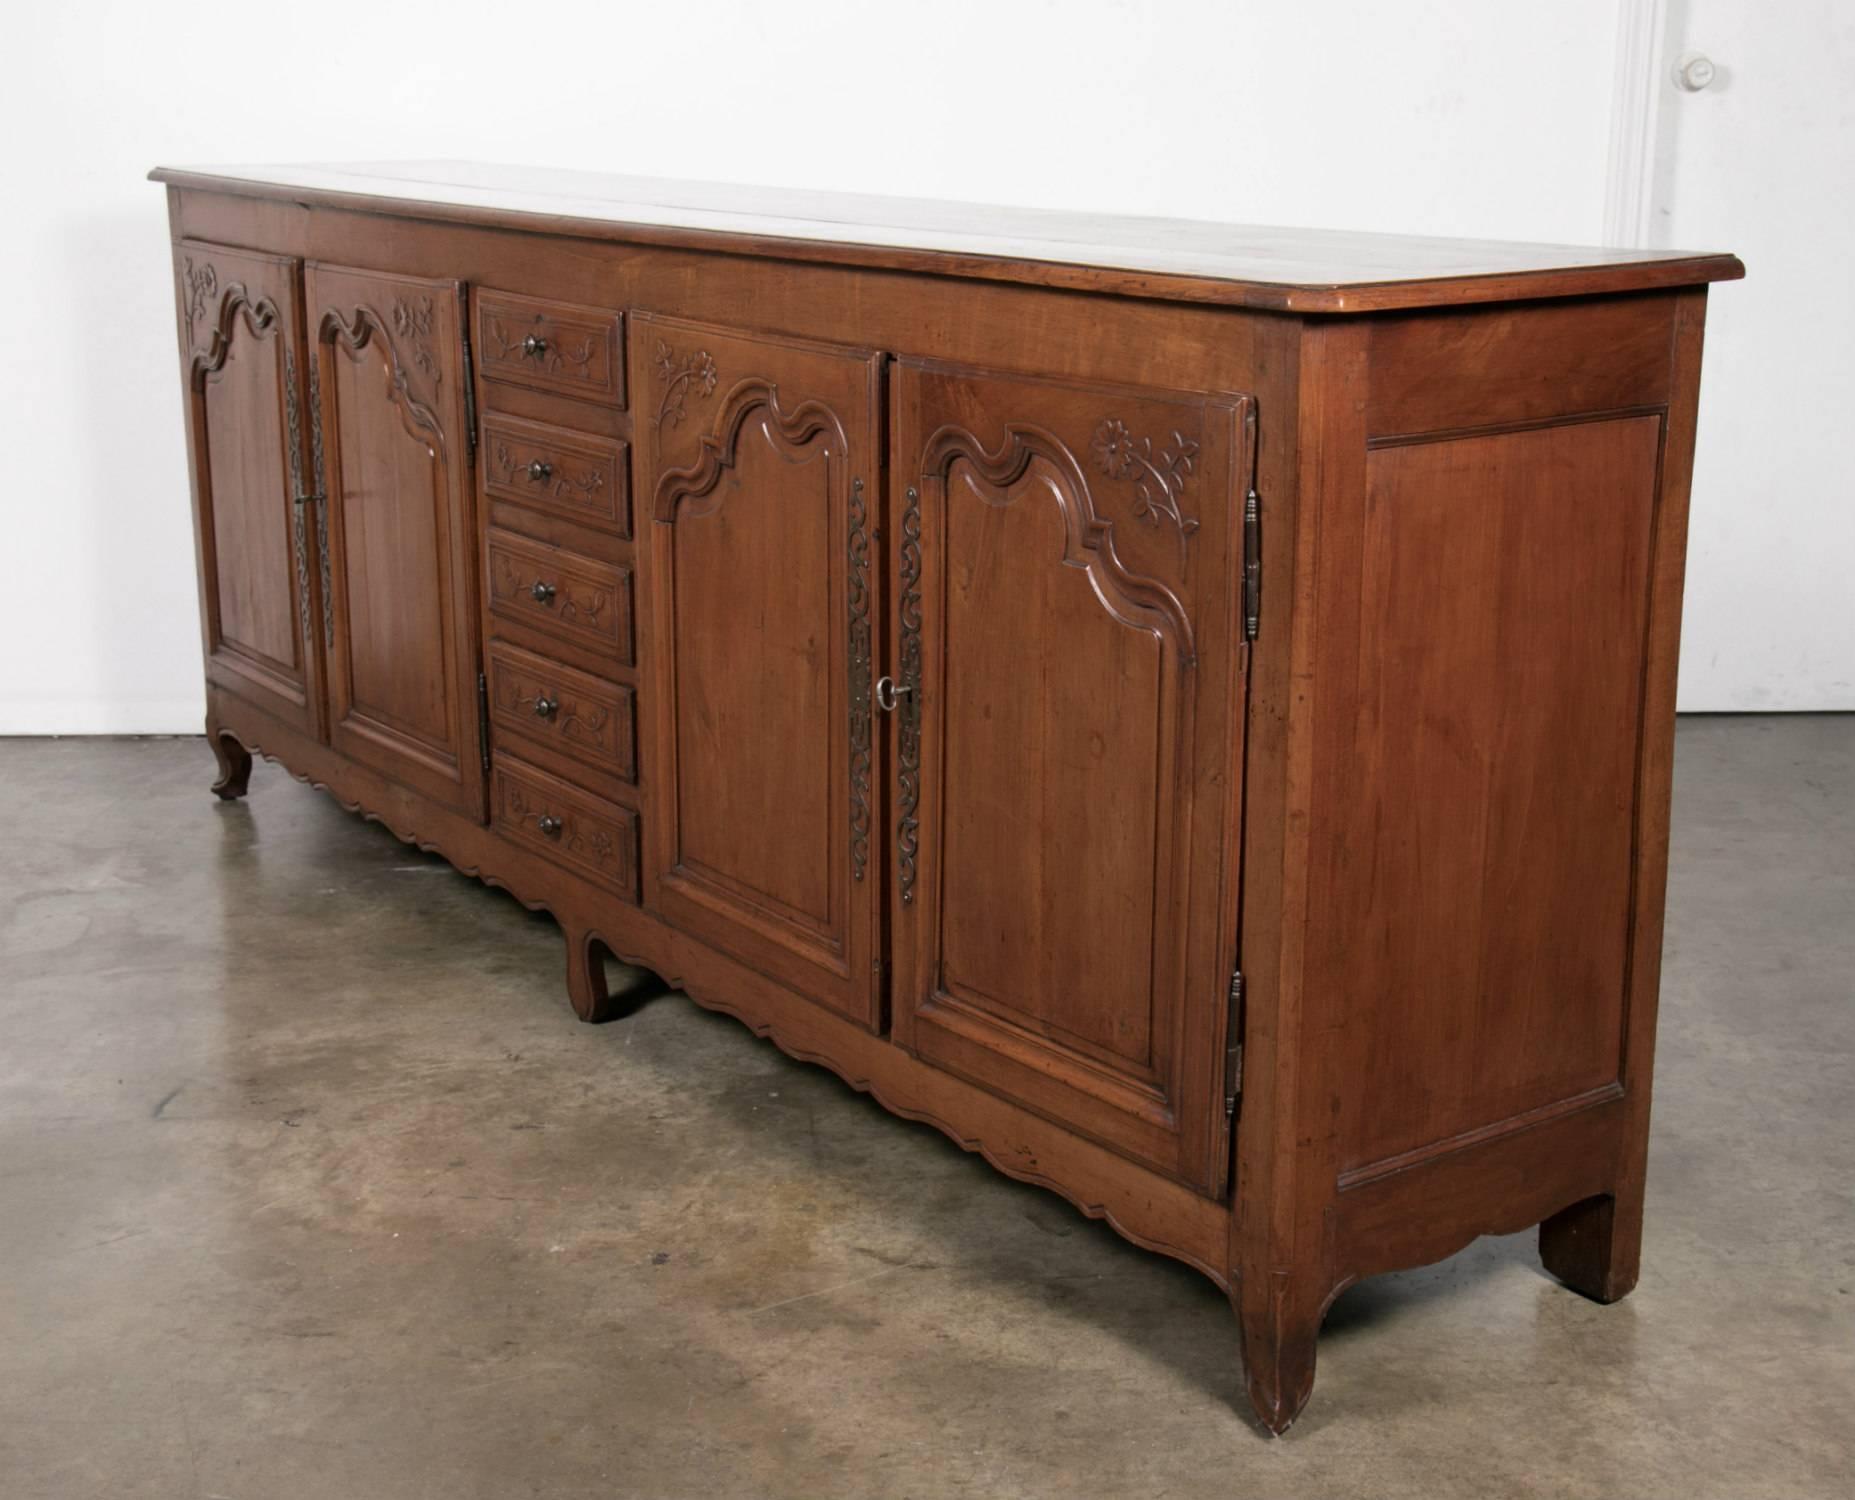 Grand French Country enfilade handcrafted in the early 1800s from solid cherrywood by talented artisans from the Brittany region located in northwest France. Spanning eight feet four and a half inches, this splendid Louis XV style enfilade buffet